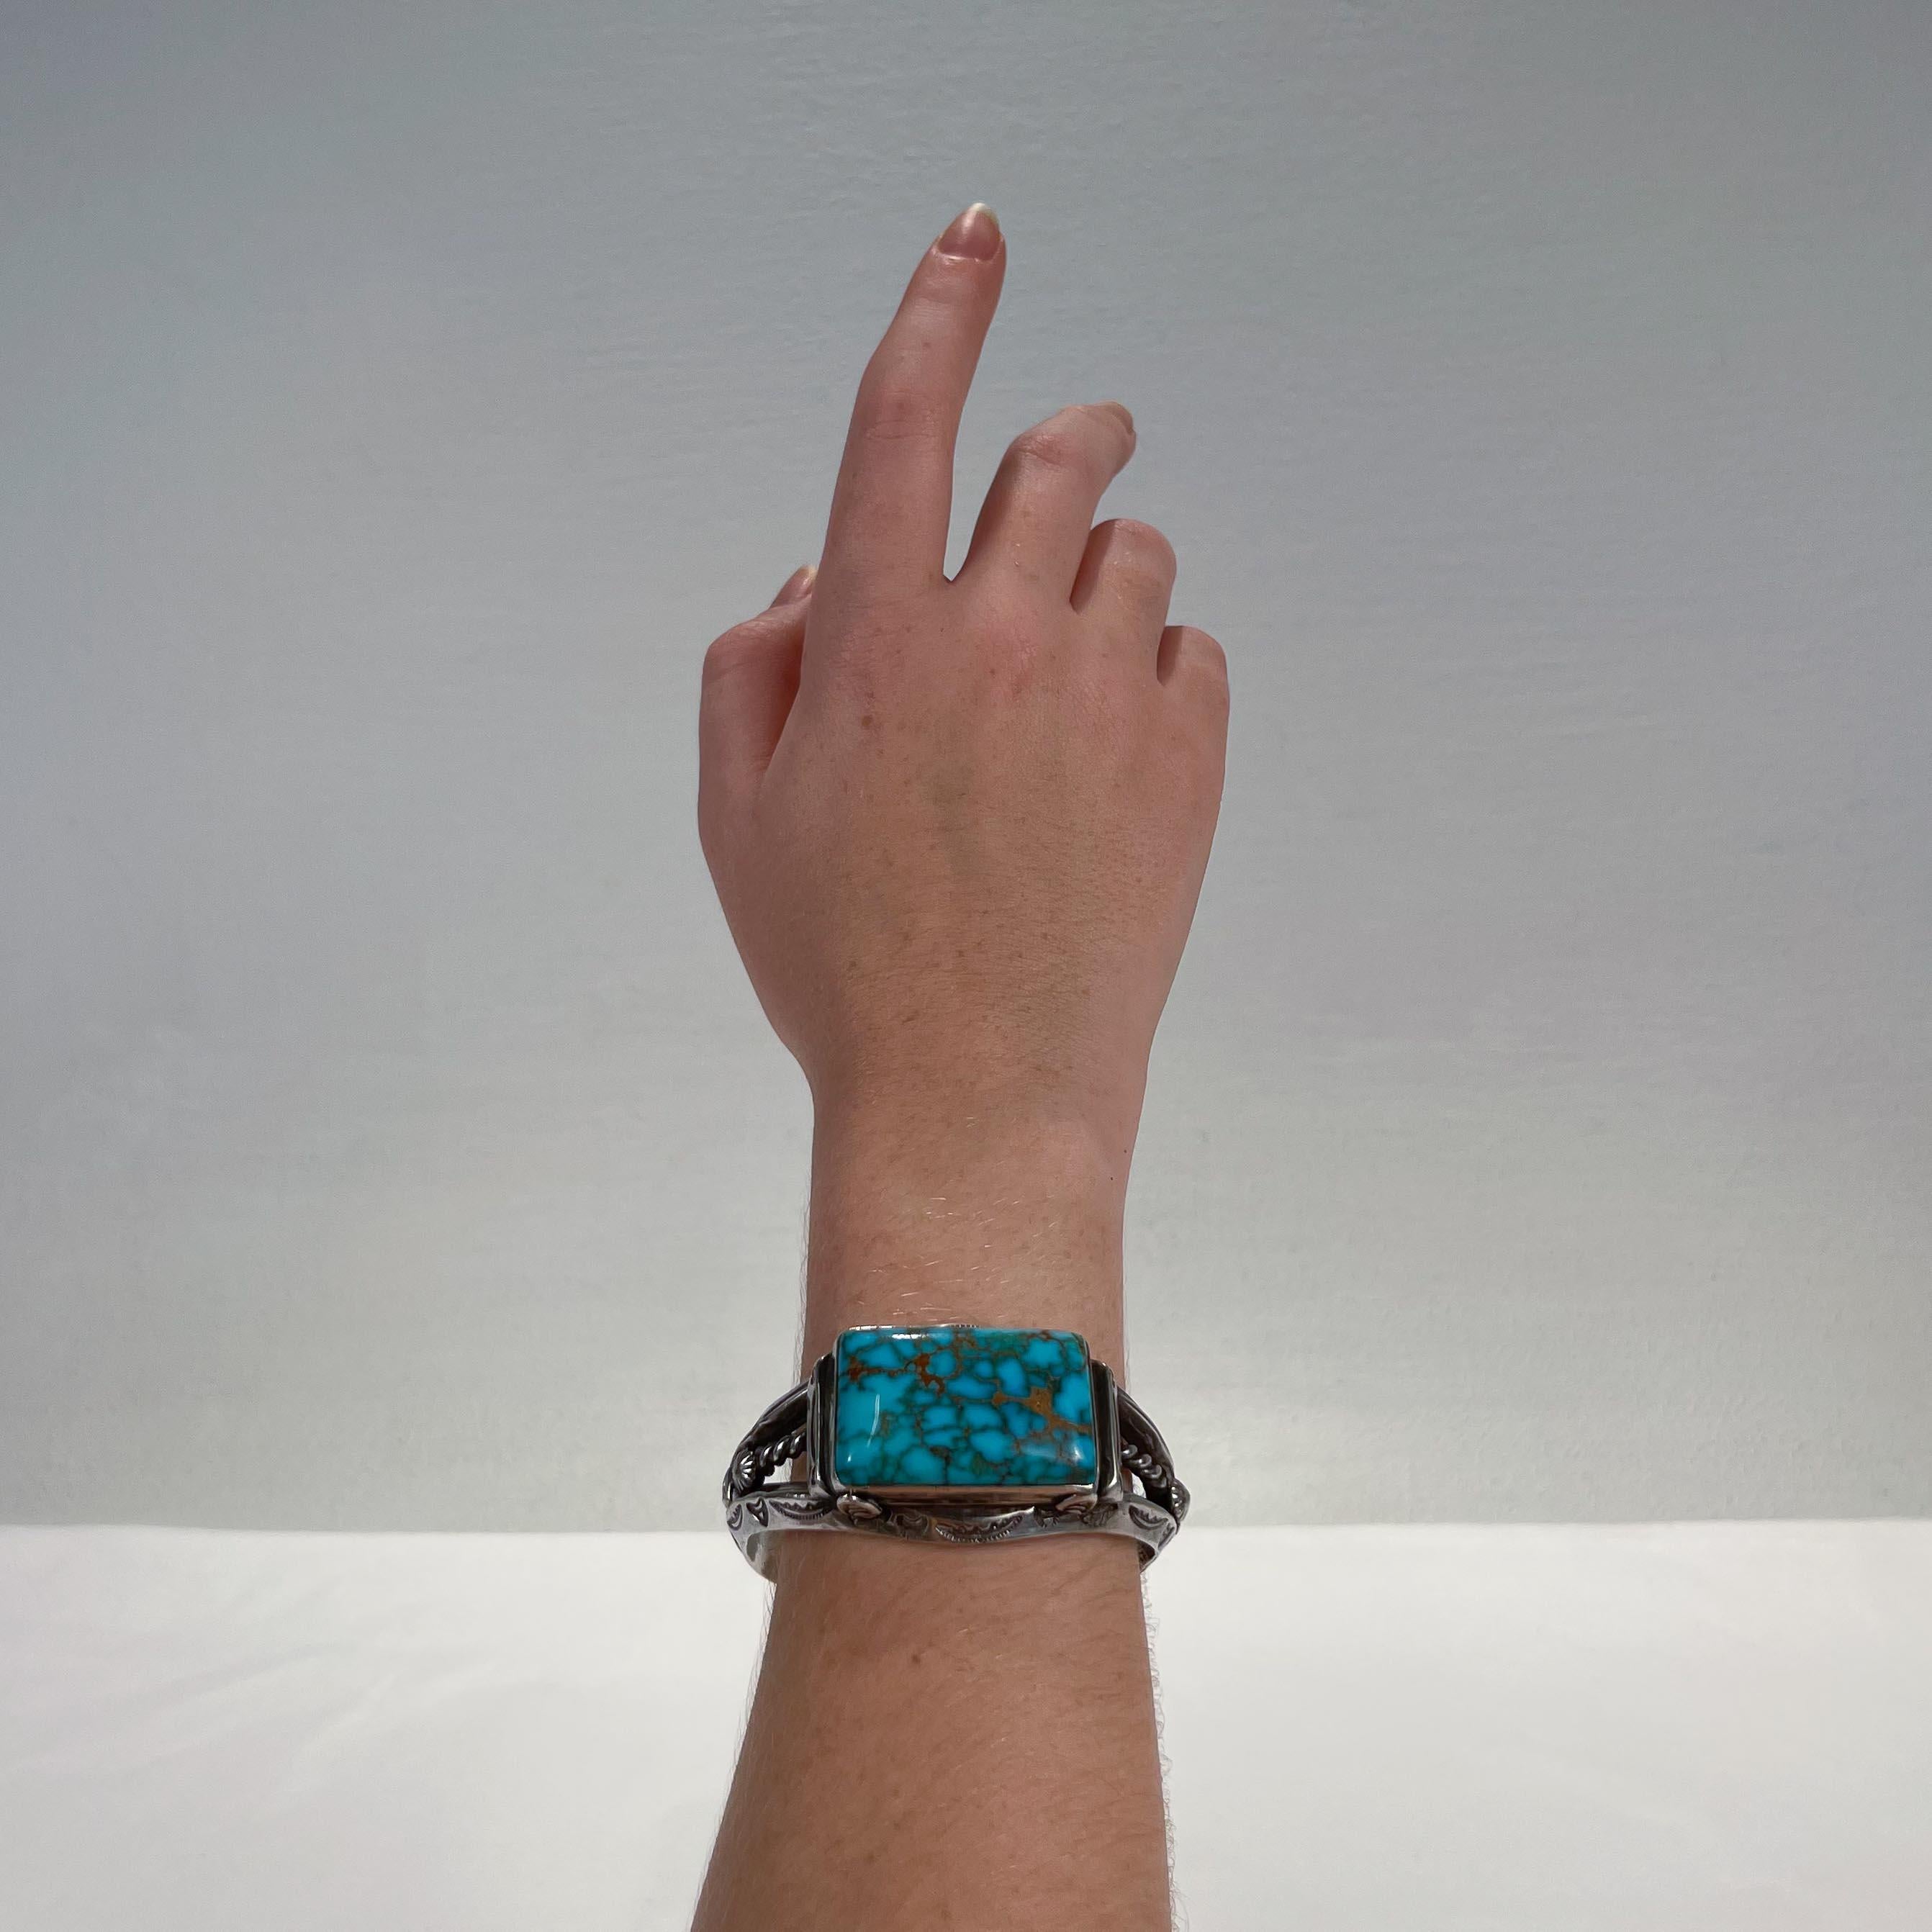 A fine Navajo turquoise and silver cuff bracelet.

Bezel-set to the top with a large cabochon matrix turquoise. 

The sides & bridge are struck with with Native American pictographs/typical symbols or devices.

A substantial bracelet that feels